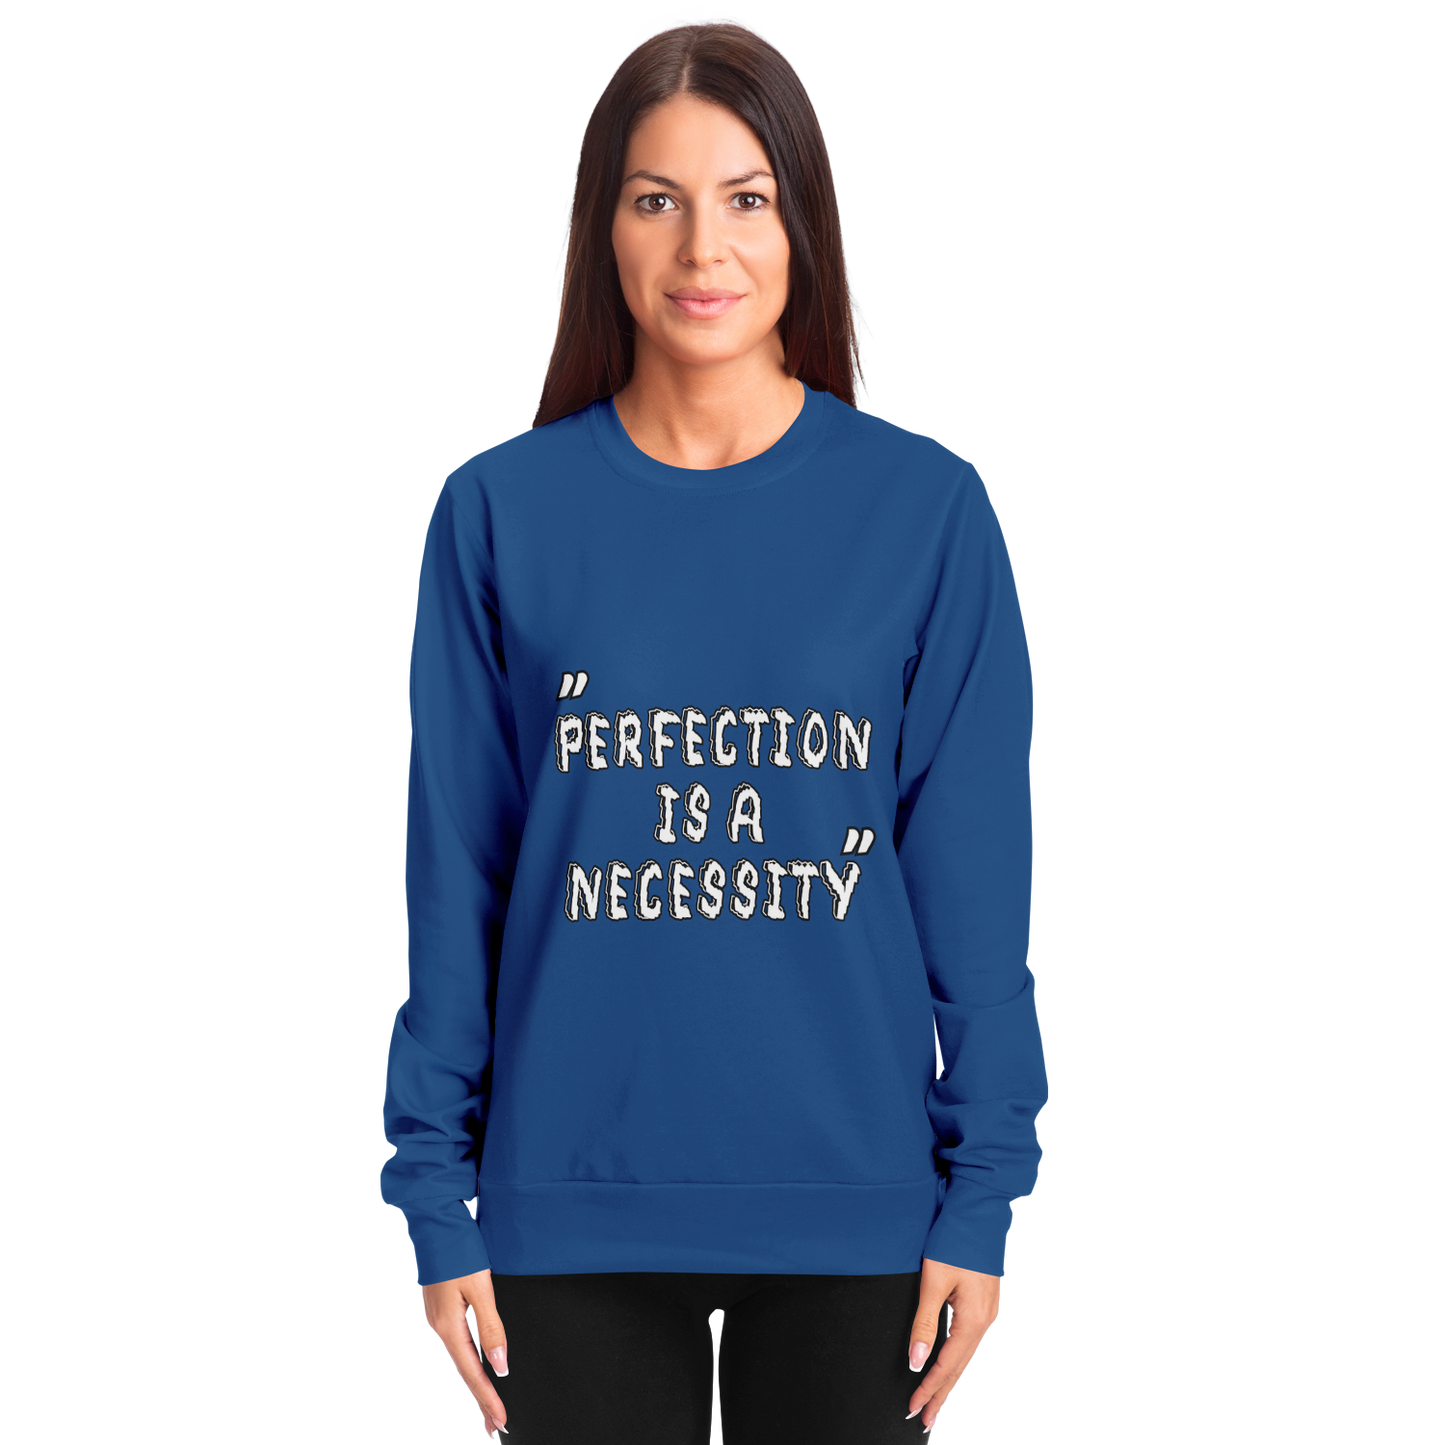 Perfection is a Necessity Winners Win Long Sleeve Shirt Blue